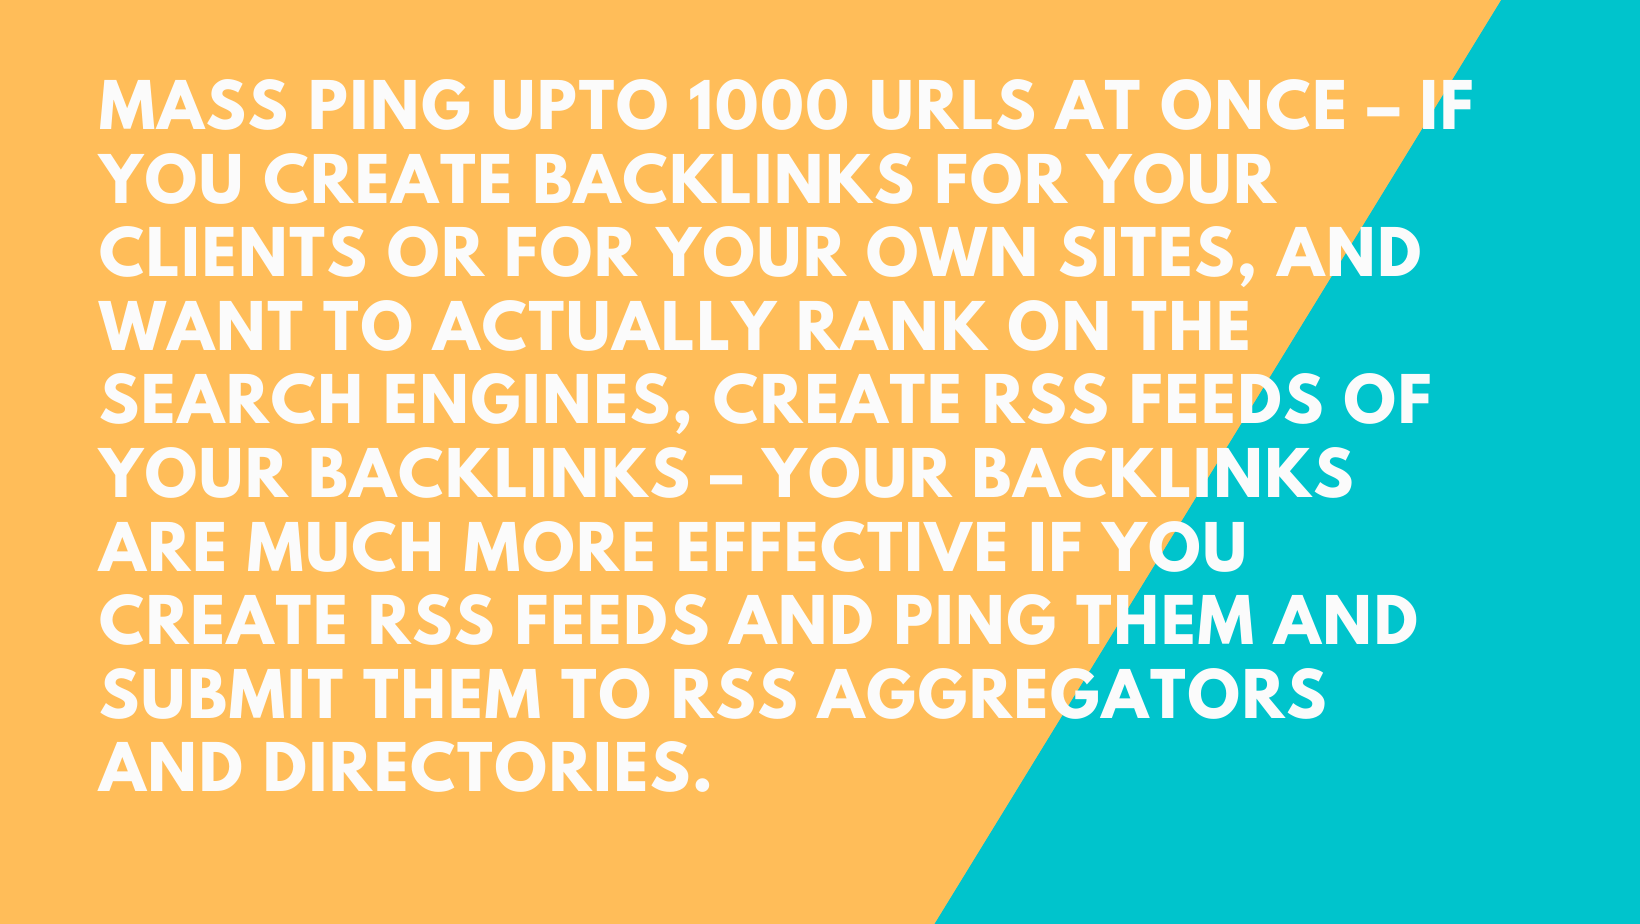 Backlink Supercharger - Here are the powerful capabilities of Backlink Supercharger